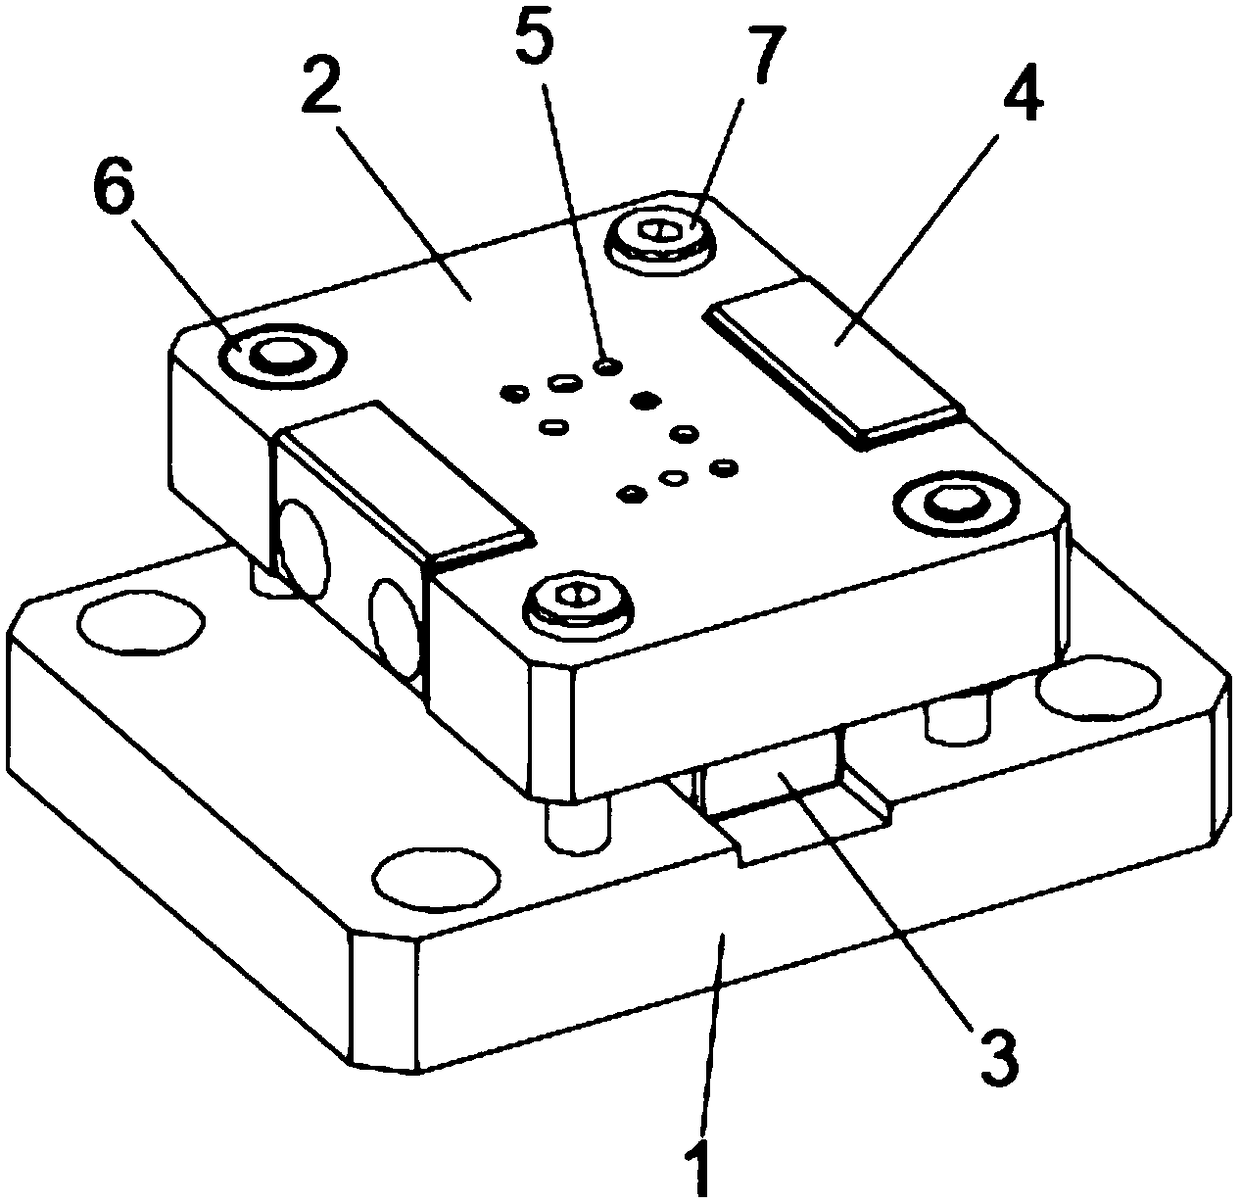 Device for detecting plastic cement PIN